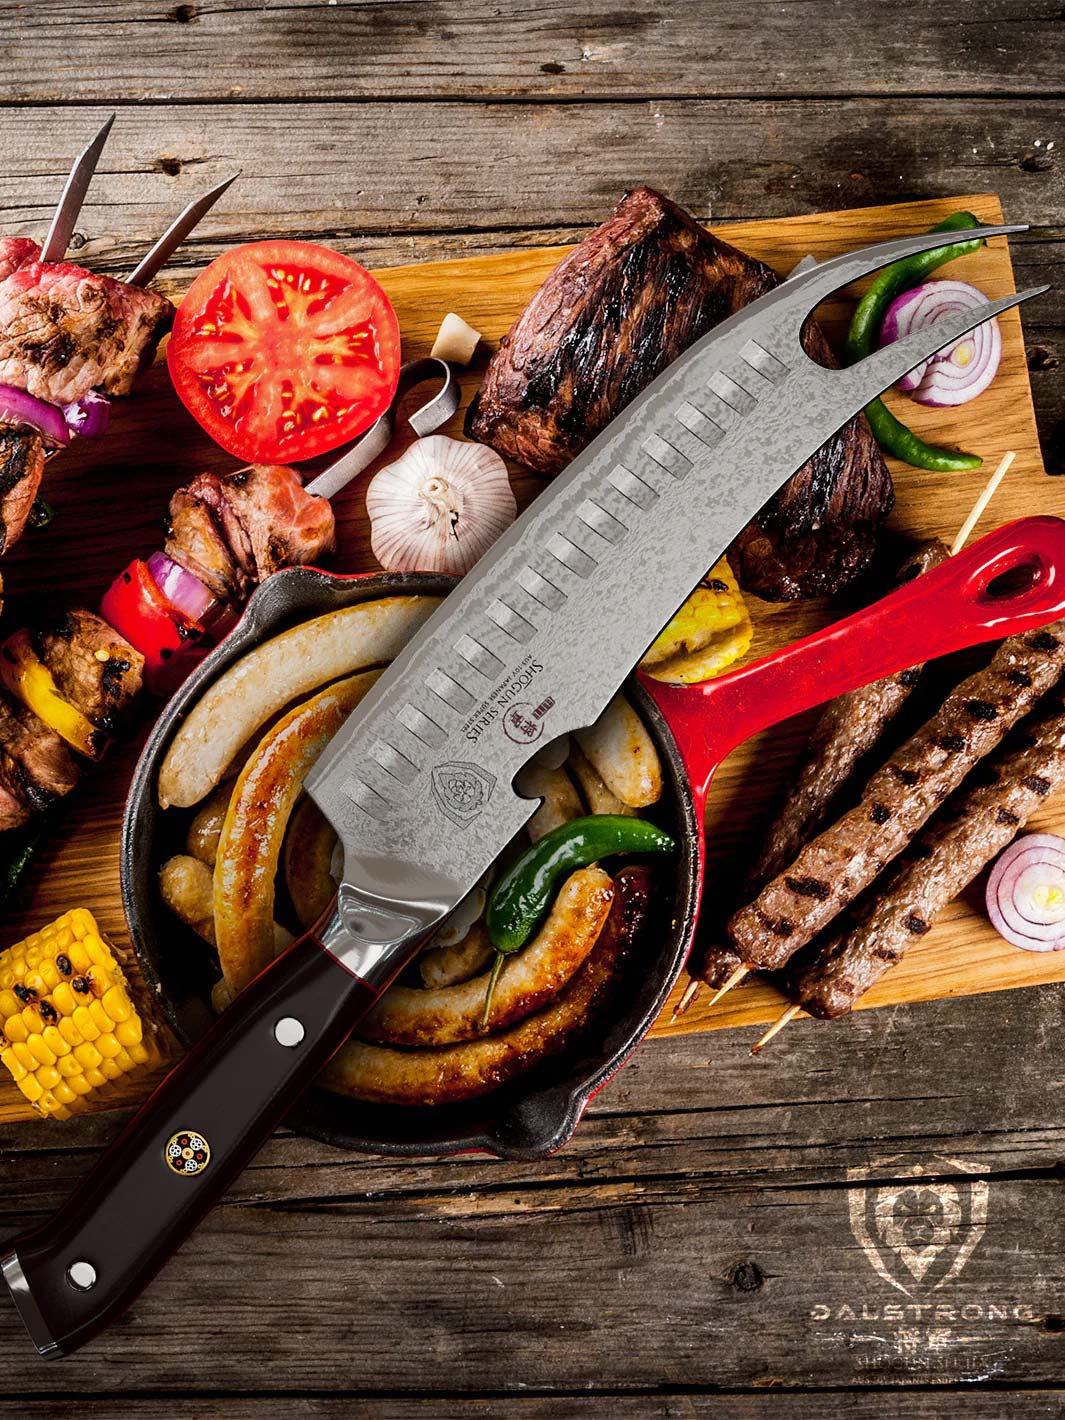 Dalstrong shogun series 8 inch pitmaster knife with black handle and different kinds of BBQ on a wooden board.